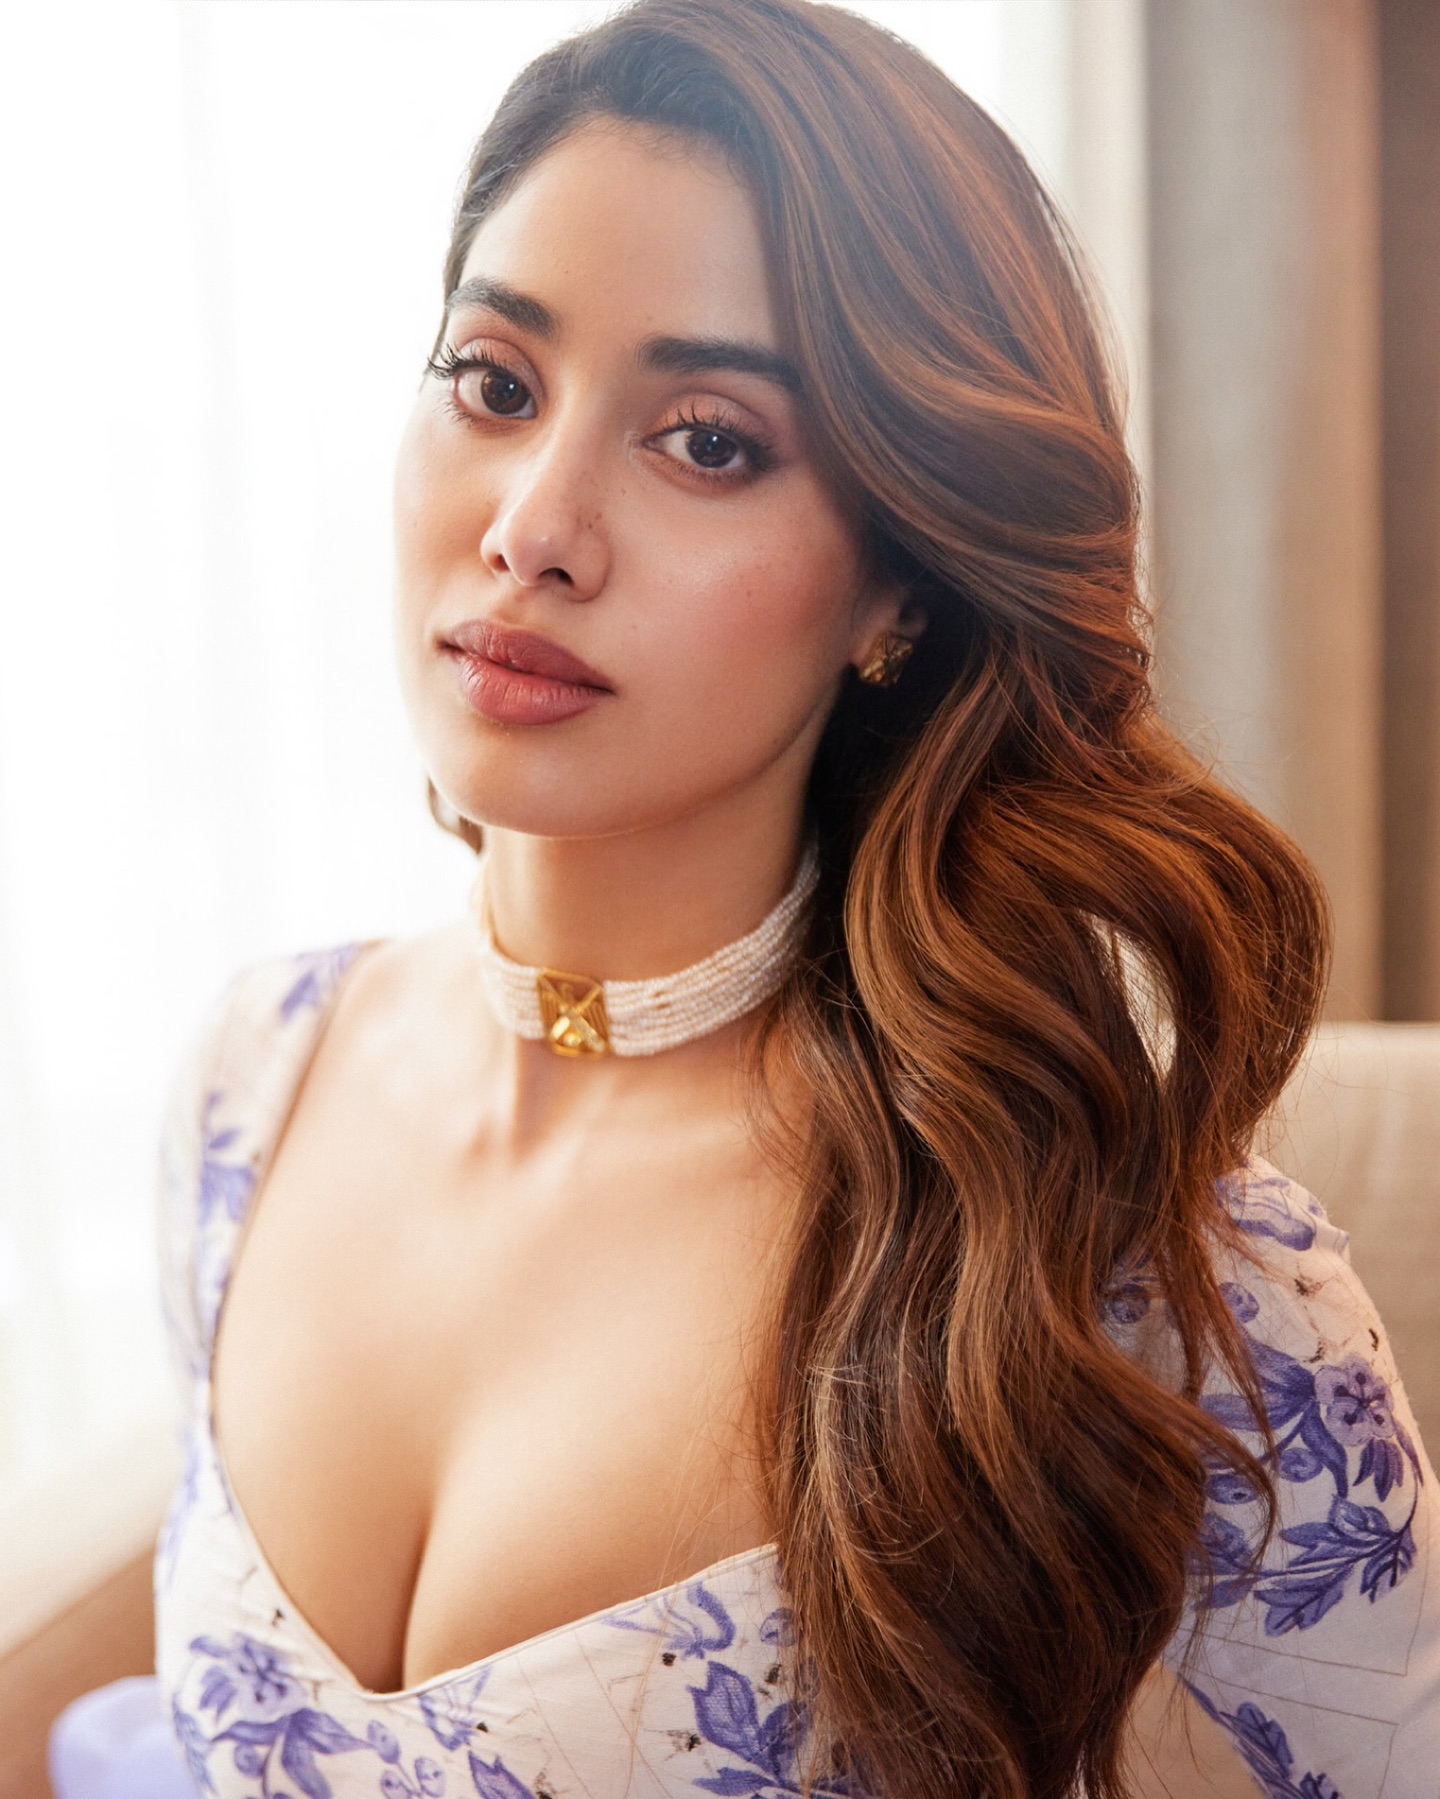 Janhvi Kapoor Stuns in Deep Neck Outfit During Mr. & Mrs. Mahi Promotions